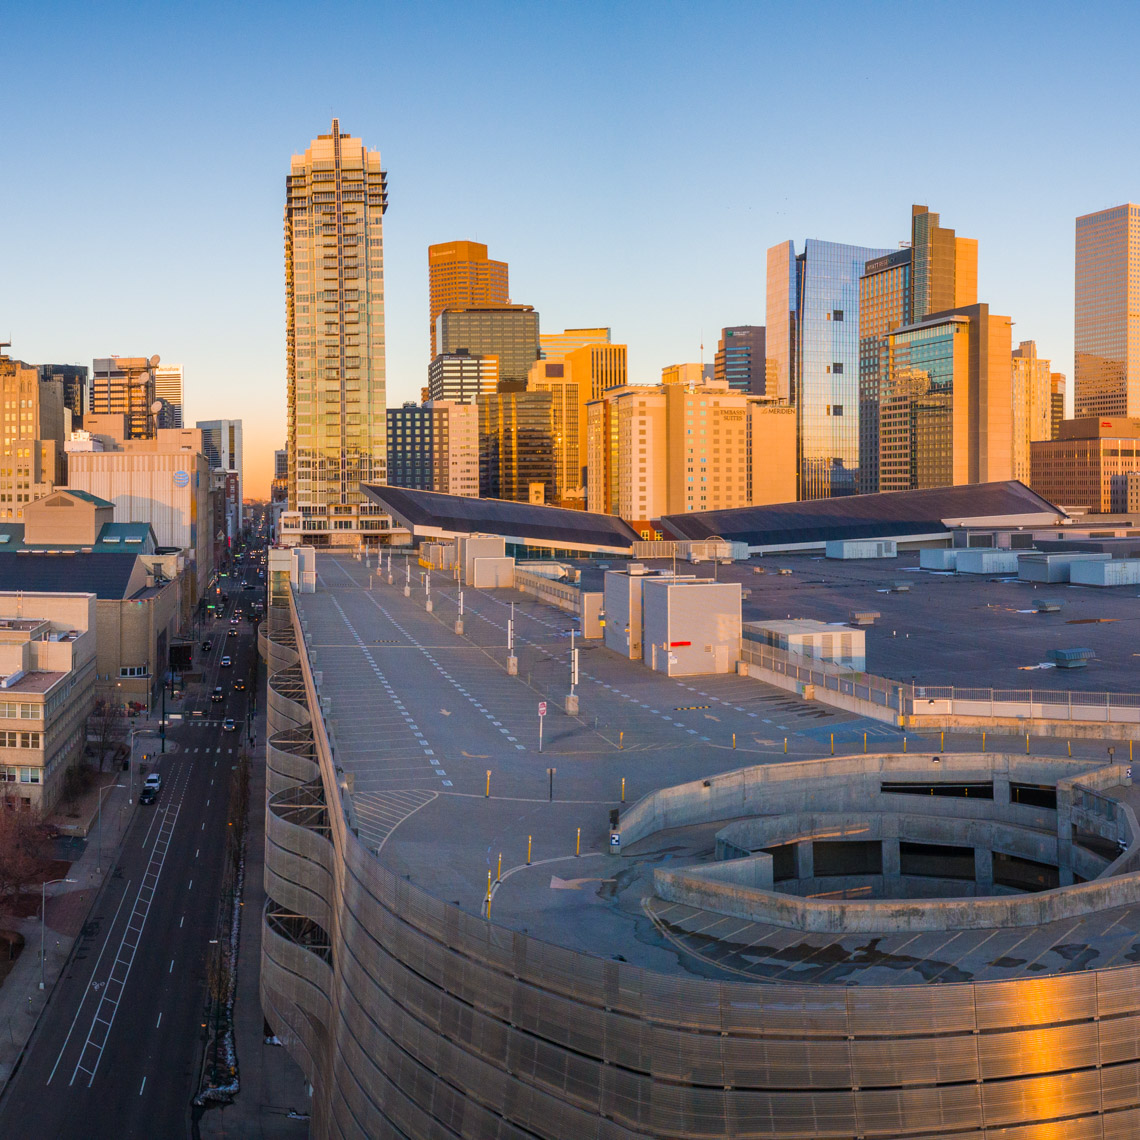 20201207-pW-188605-Pano-2